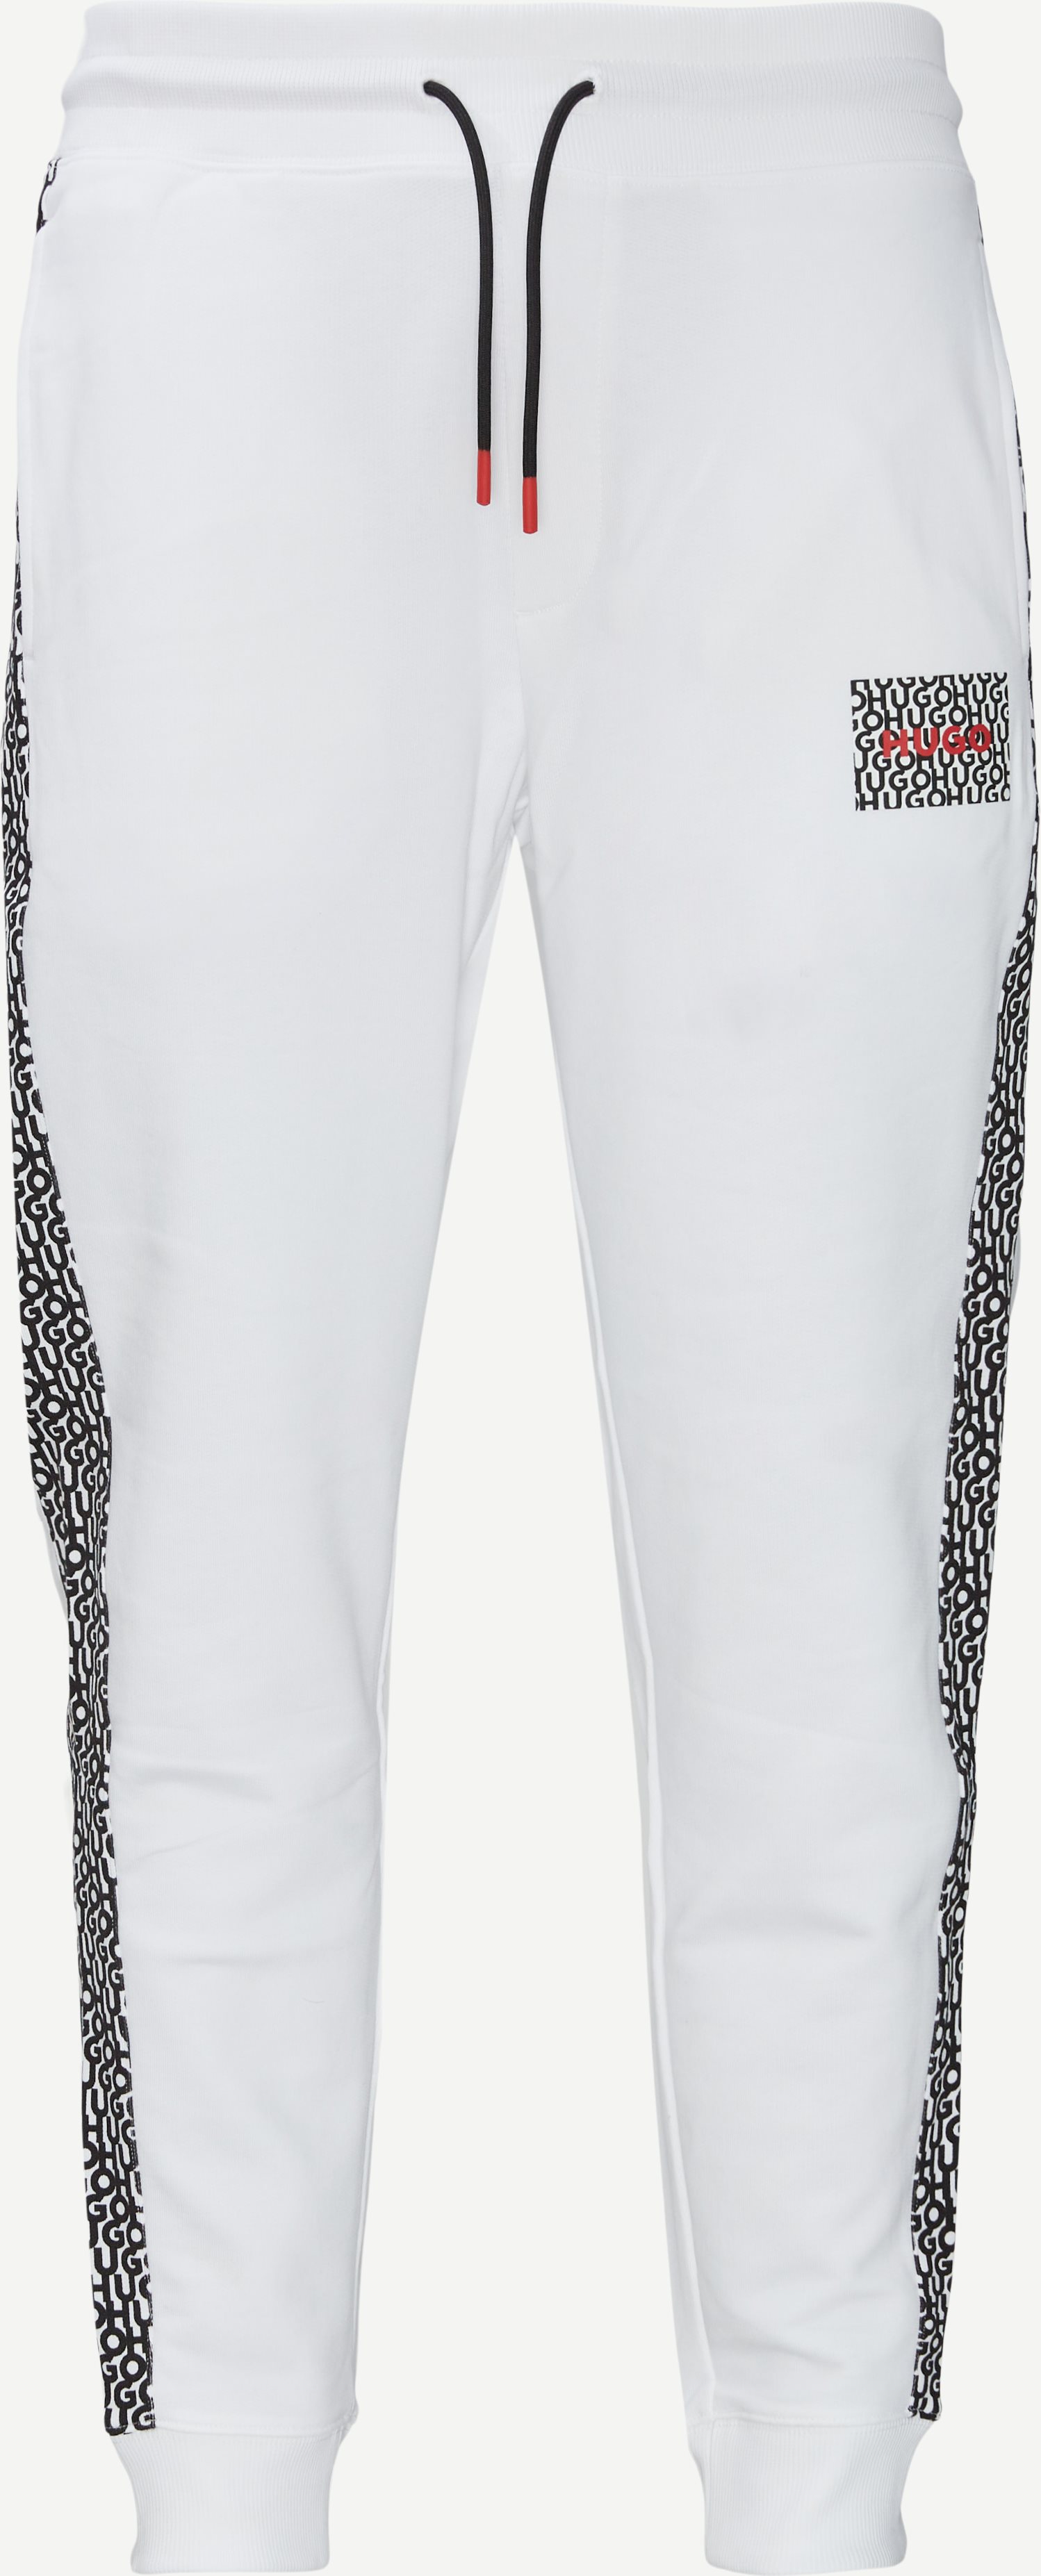 Trousers - Regular fit - White